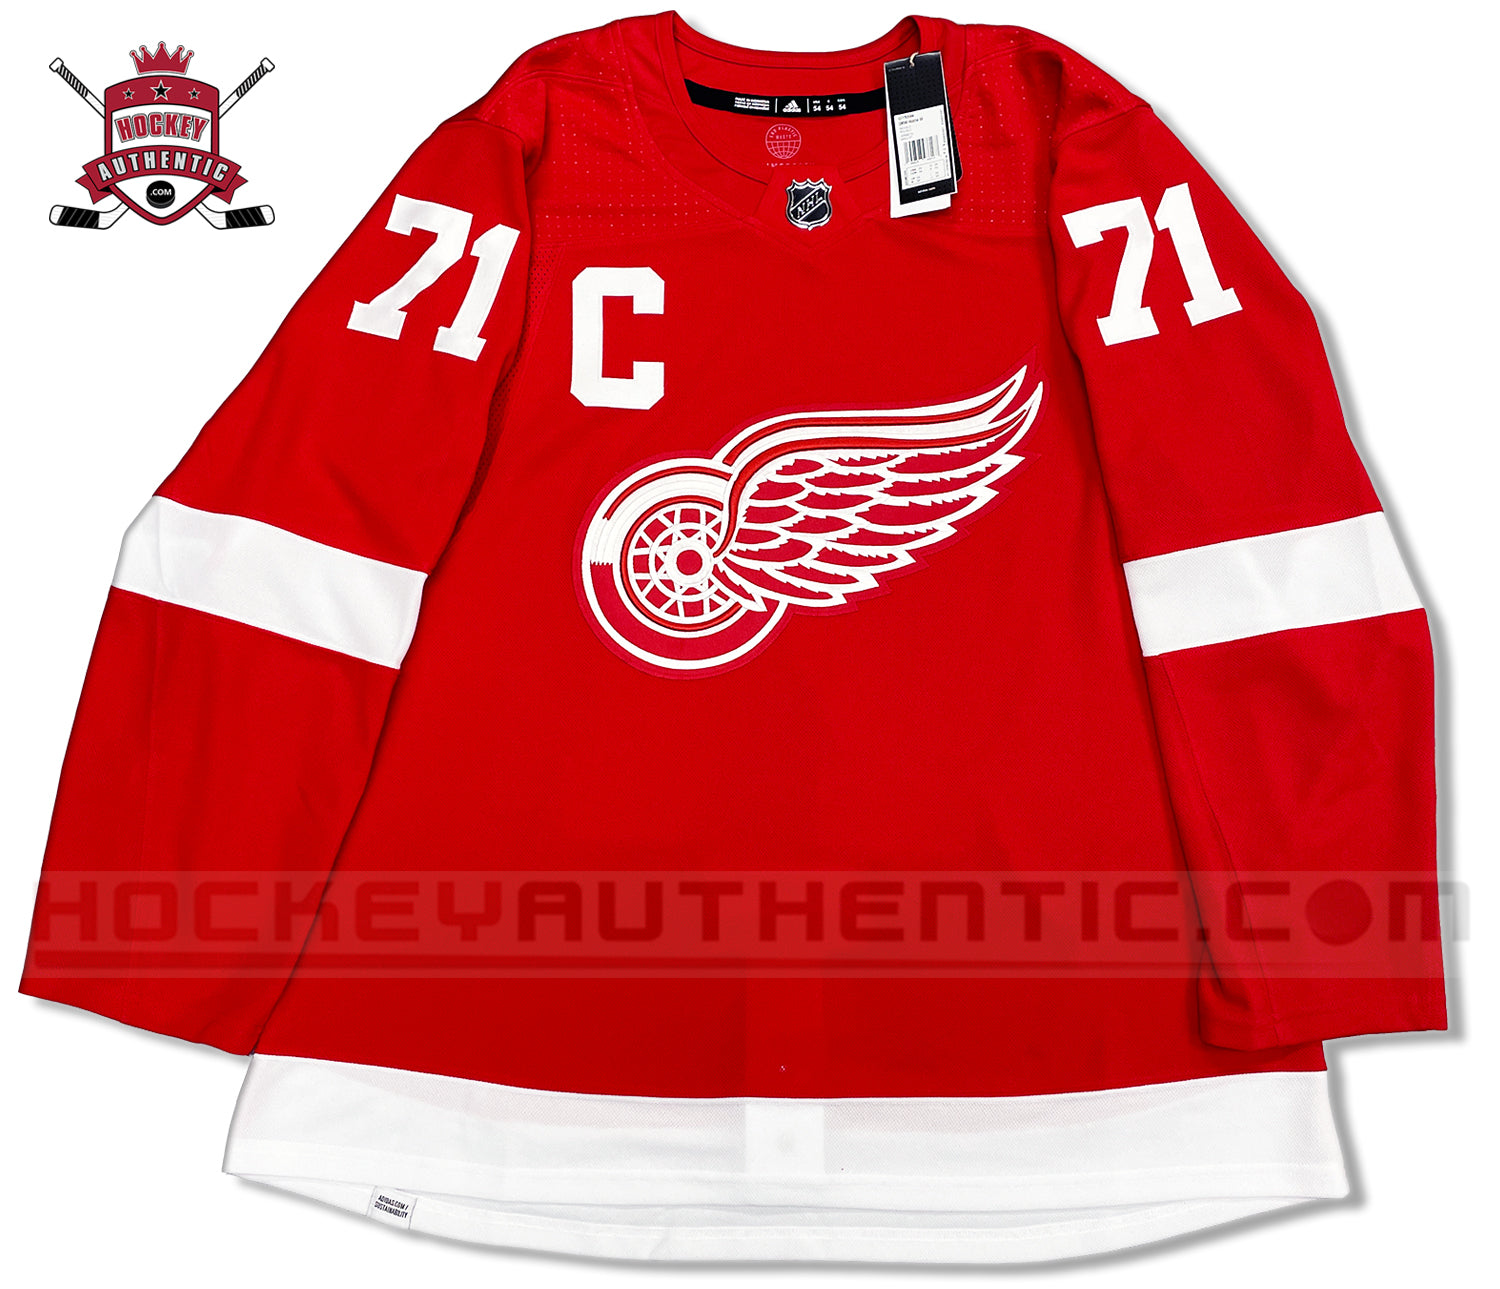 Detroit Red Wings Size 56 Adidas Jersey Brand New